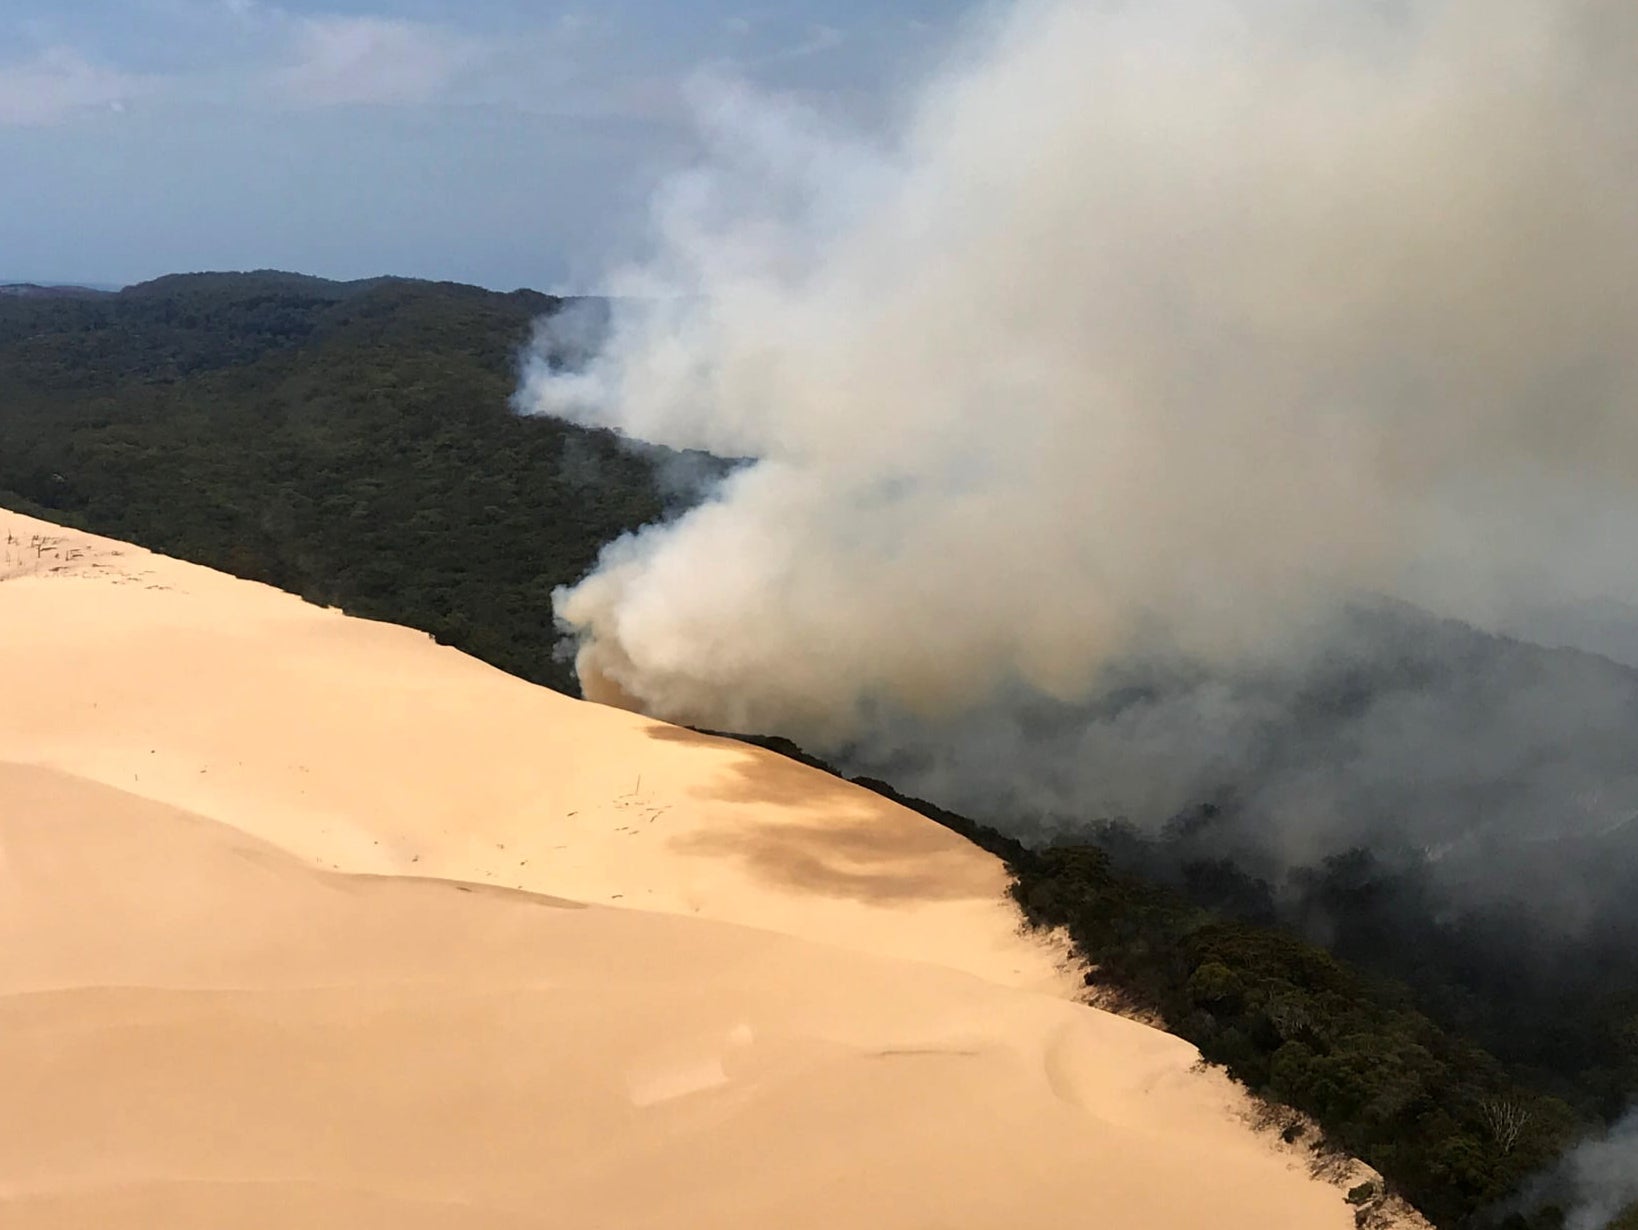 File. In this handout image provided by Queensland Fire and Emergency Services, bushfires continue to burn on 30 November 2020 on Fraser Island, Australia. [Representational]